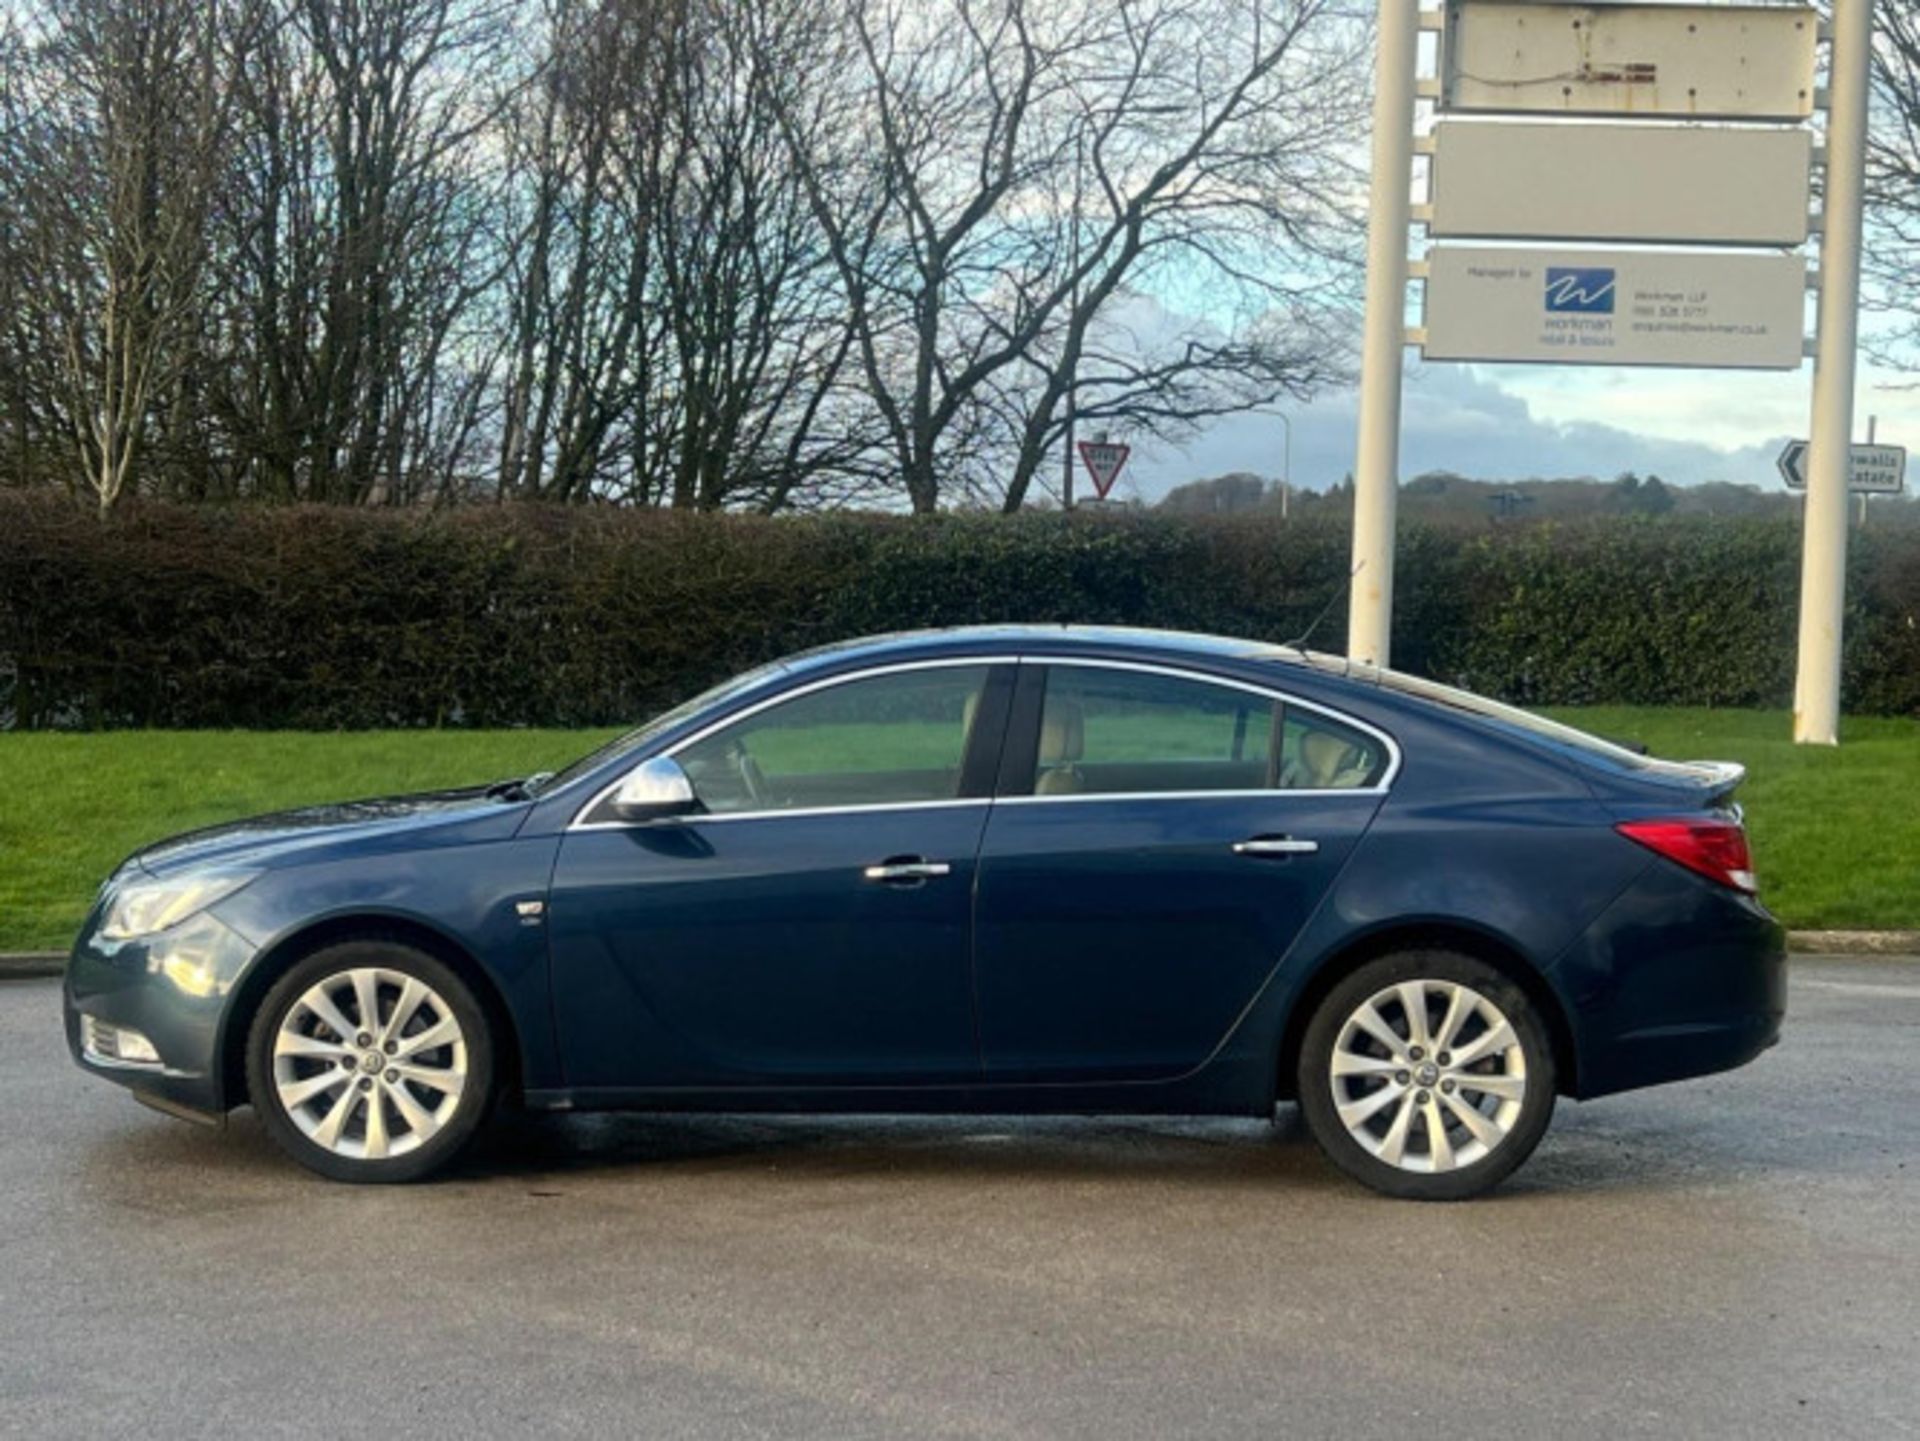 2012 VAUXHALL INSIGNIA 2.0 CDTI ELITE AUTO EURO 5 - DISCOVER EXCELLENCE >>--NO VAT ON HAMMER--<< - Image 77 of 79